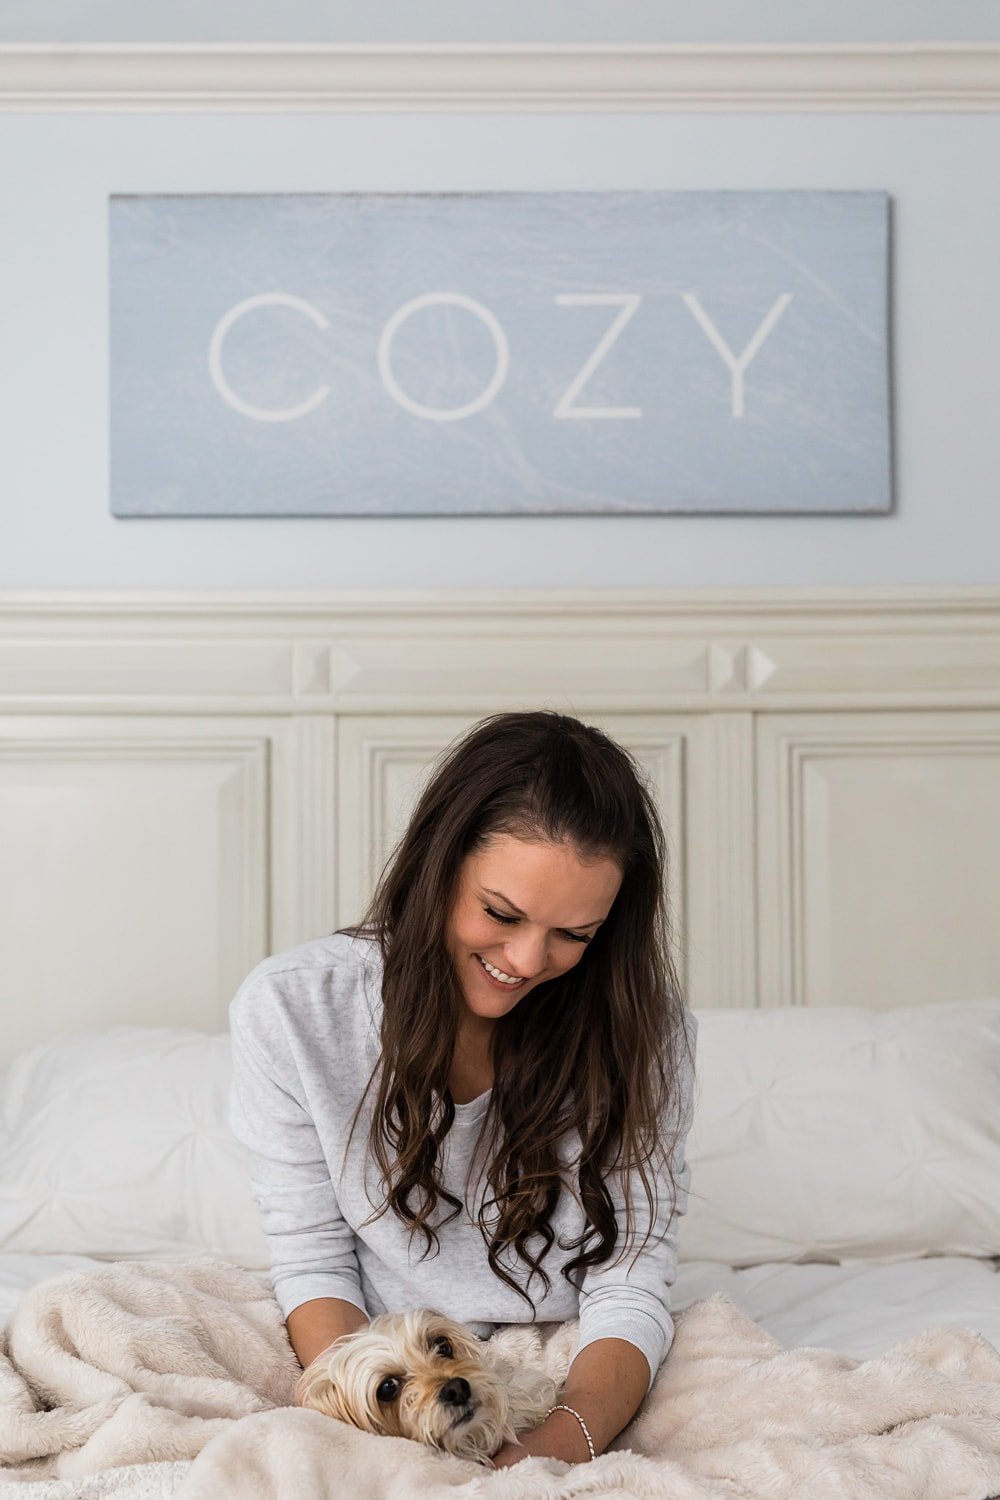 The Cozy Cook, Stephanie Melchione, in a cozy bed with her dog Toby.